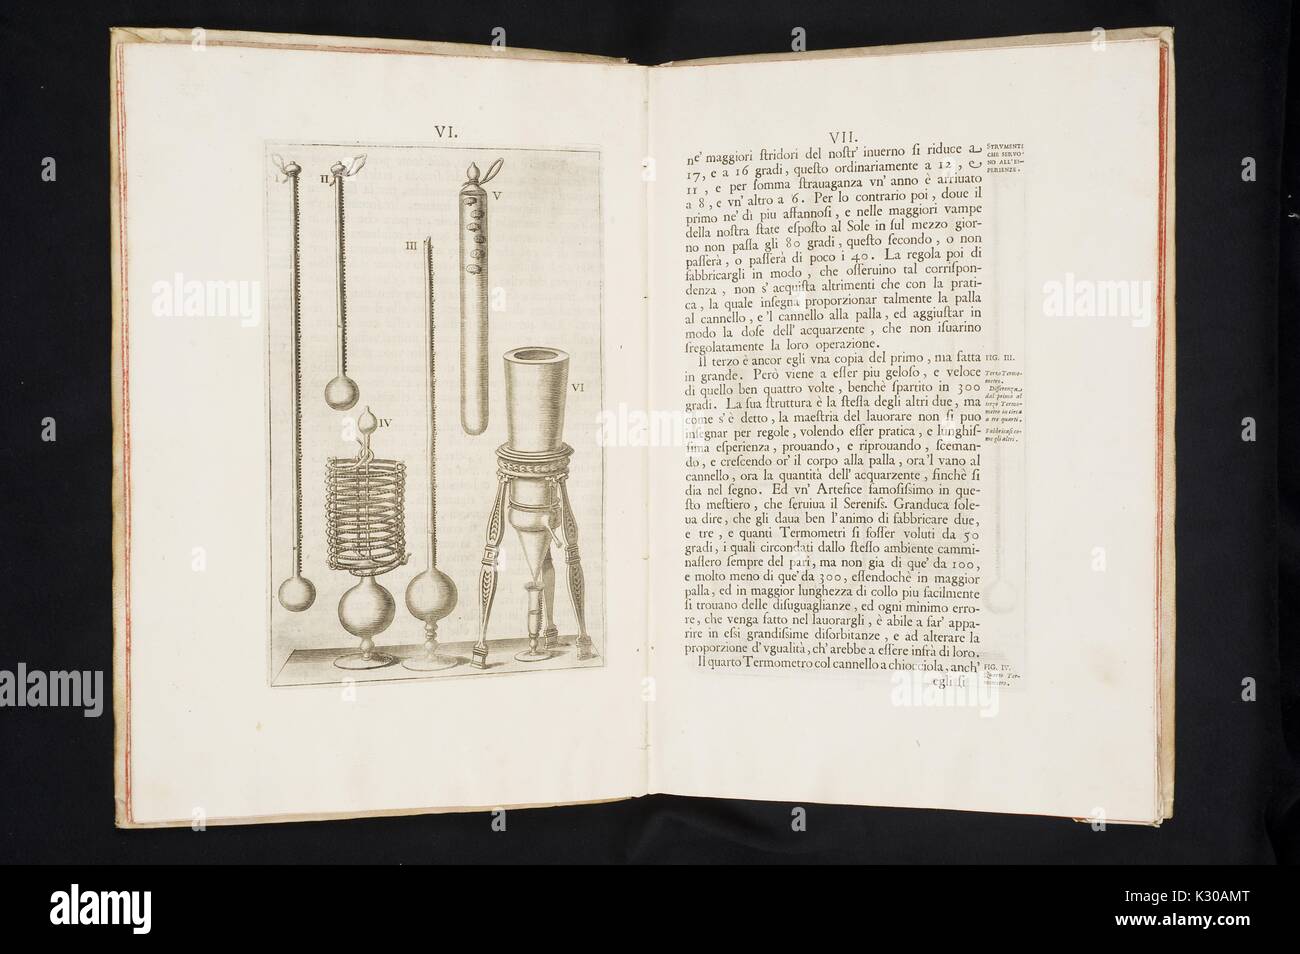 Illustration of instruments used in an important experiment on atmospheric pressure in a first edition copy of Saggi di Naturali Esperienze published by the Accademia del Cimento from the Dr. Elliott and Eileen Hinkes Collection of Rare Books of Scientific Discovery housed in the Sheridan Libraries of Johns Hopkins University, 2010. Stock Photo